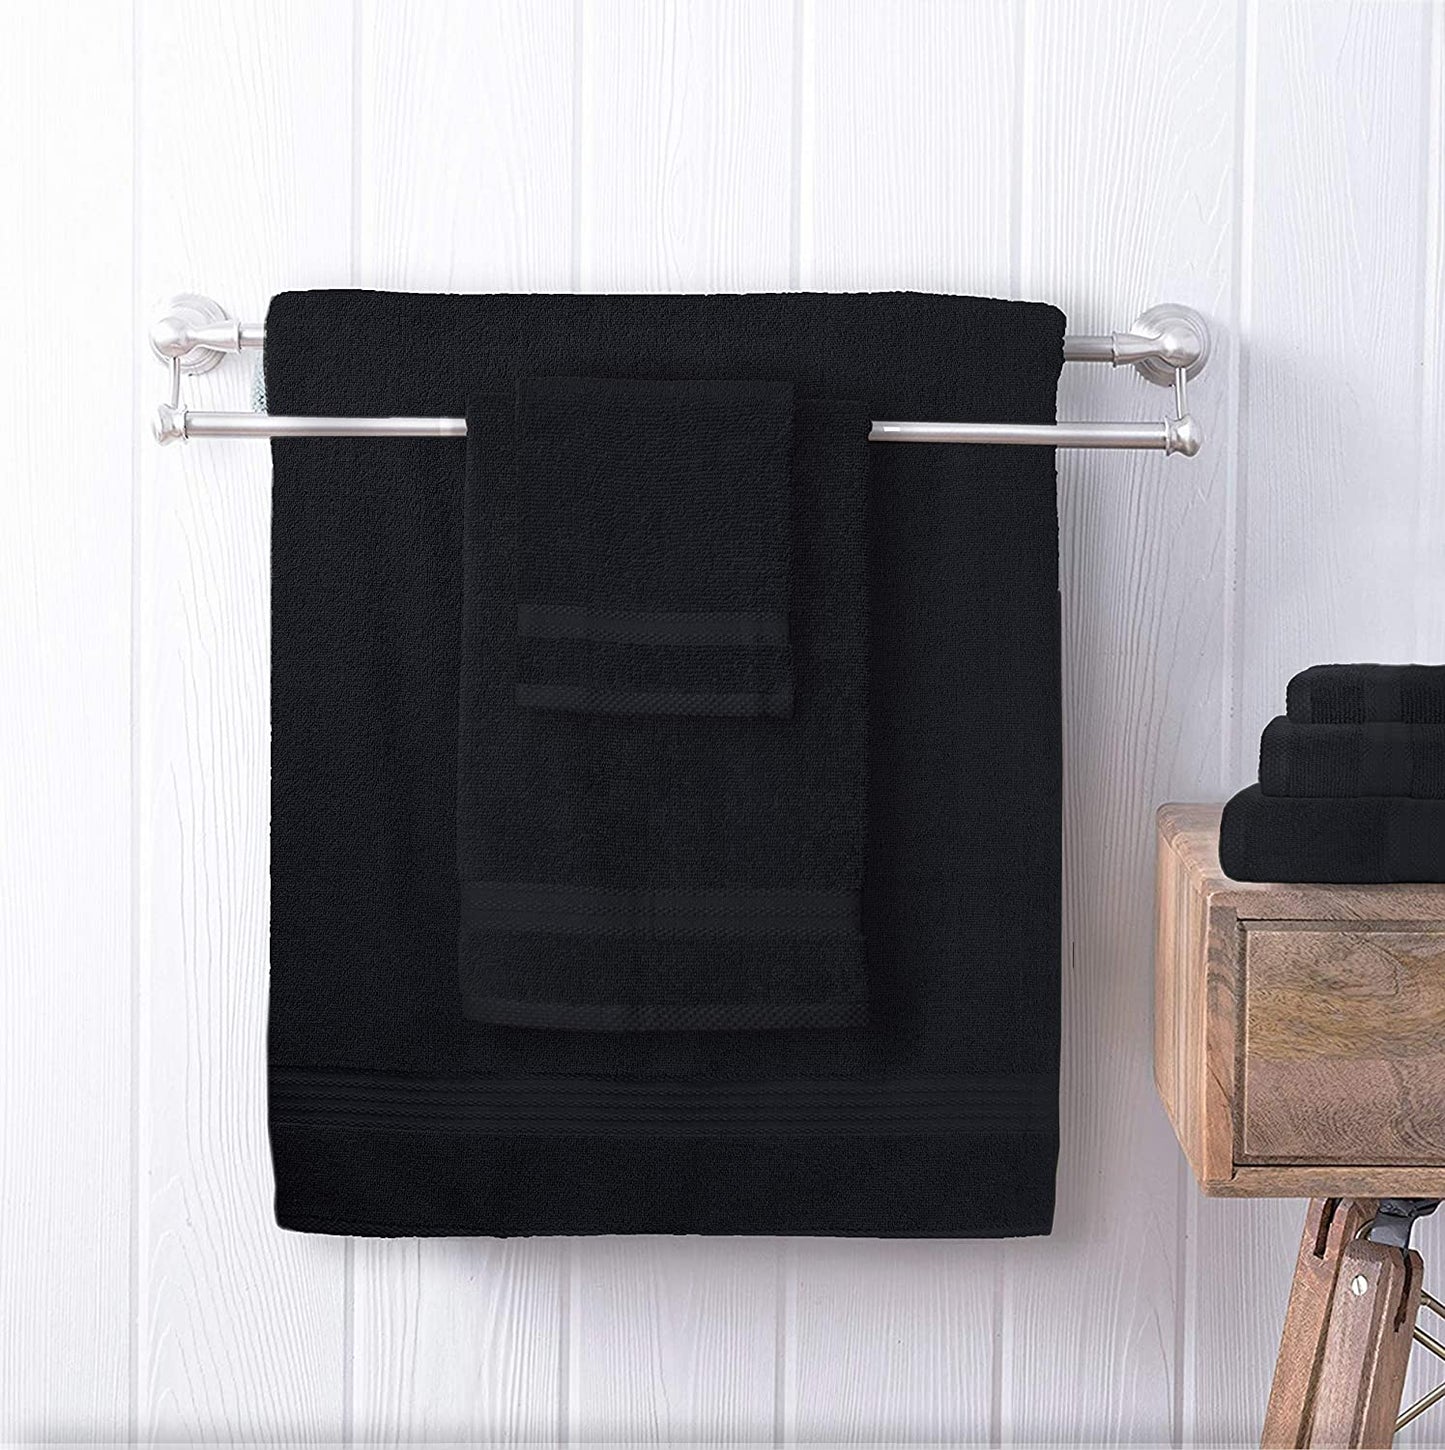 Ultra Soft 8-Piece Towel Set - 100% Pure Ringspun Cotton, Contains 2 Oversized Bath Towels 27x54, 2 Hand Towels 16x28, 4 Wash Cloths 13x13 - Ideal for Everyday use, Hotel & Spa - Black